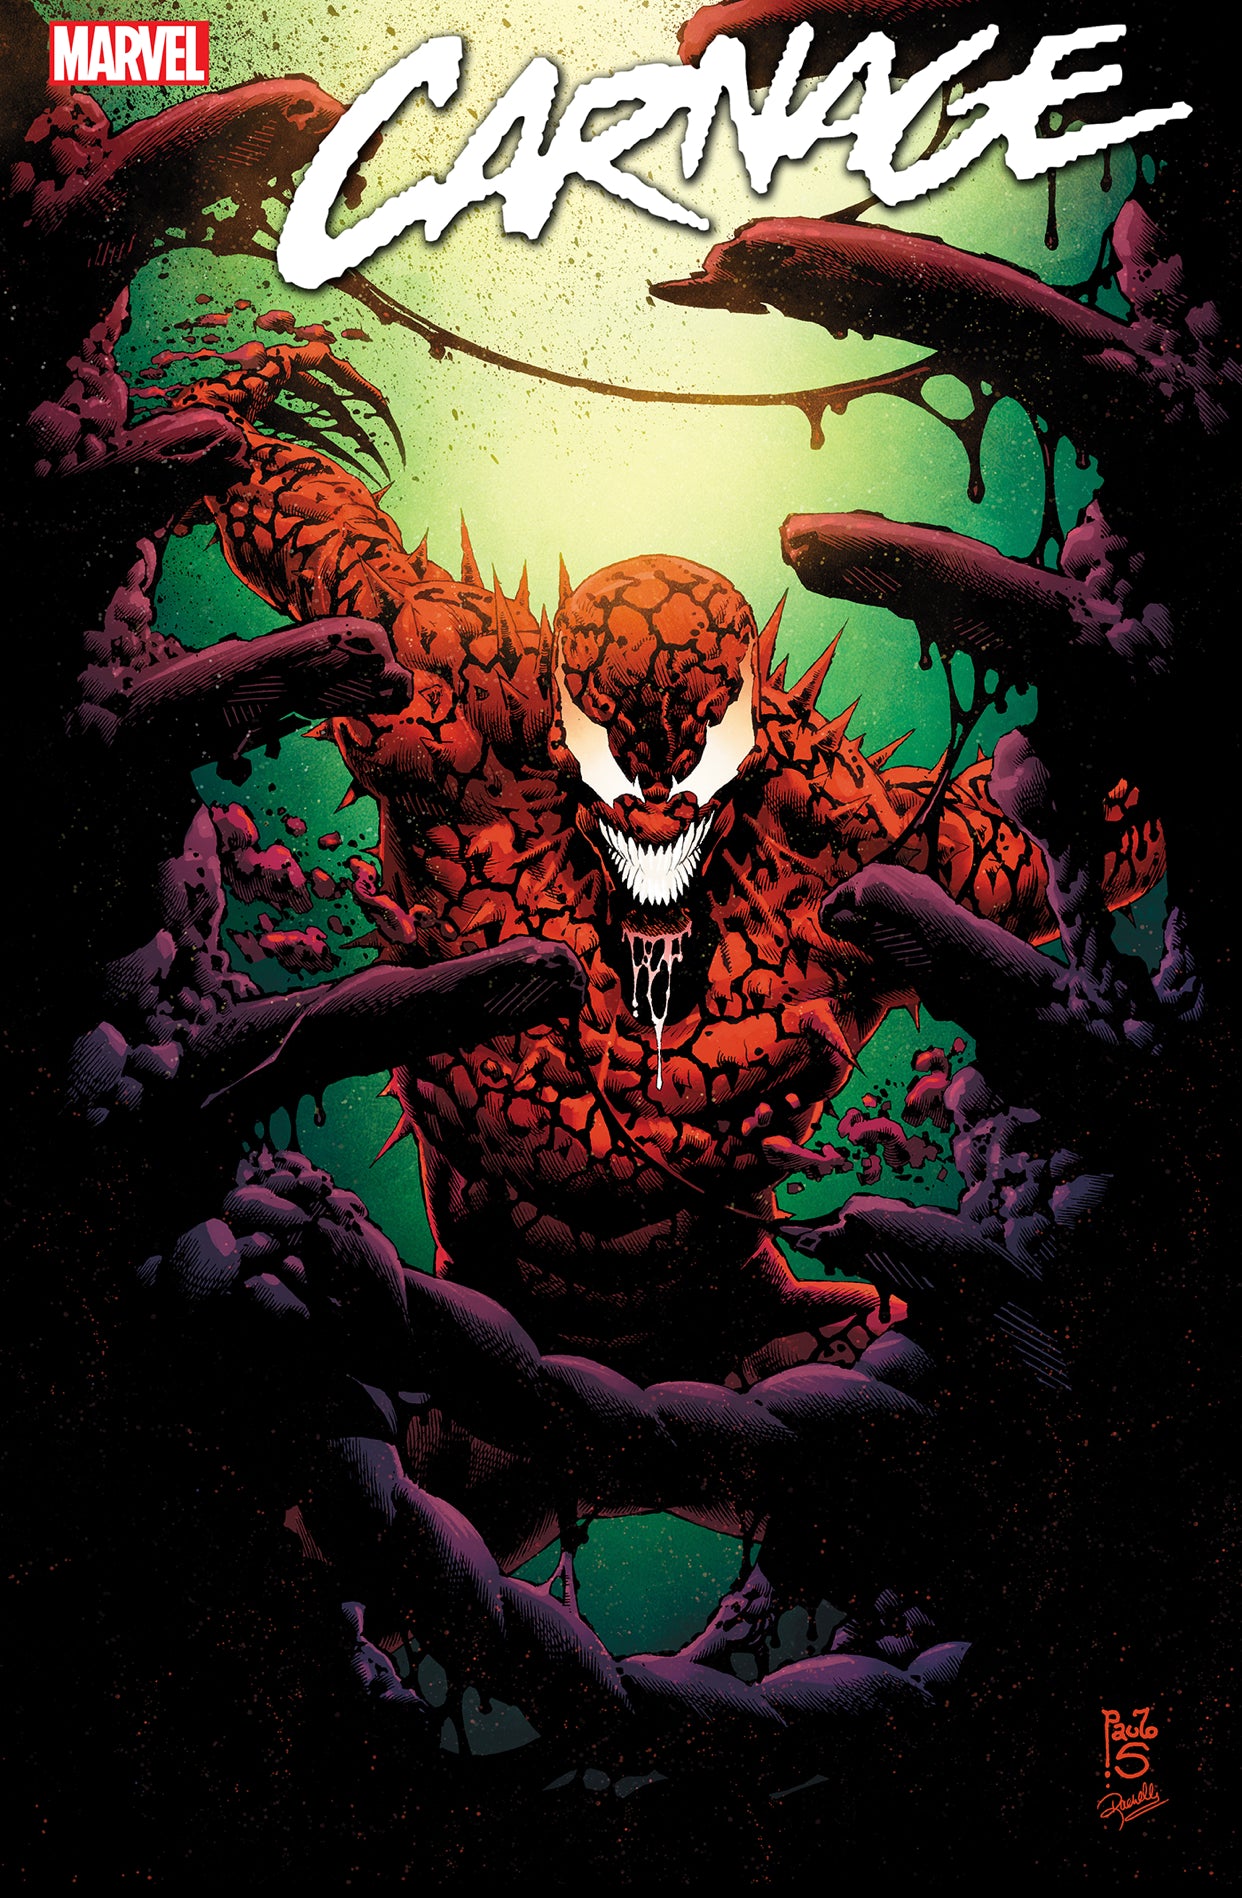 CARNAGE #1 PAULO SIQUEIRA 1:50 Ratio Variant 